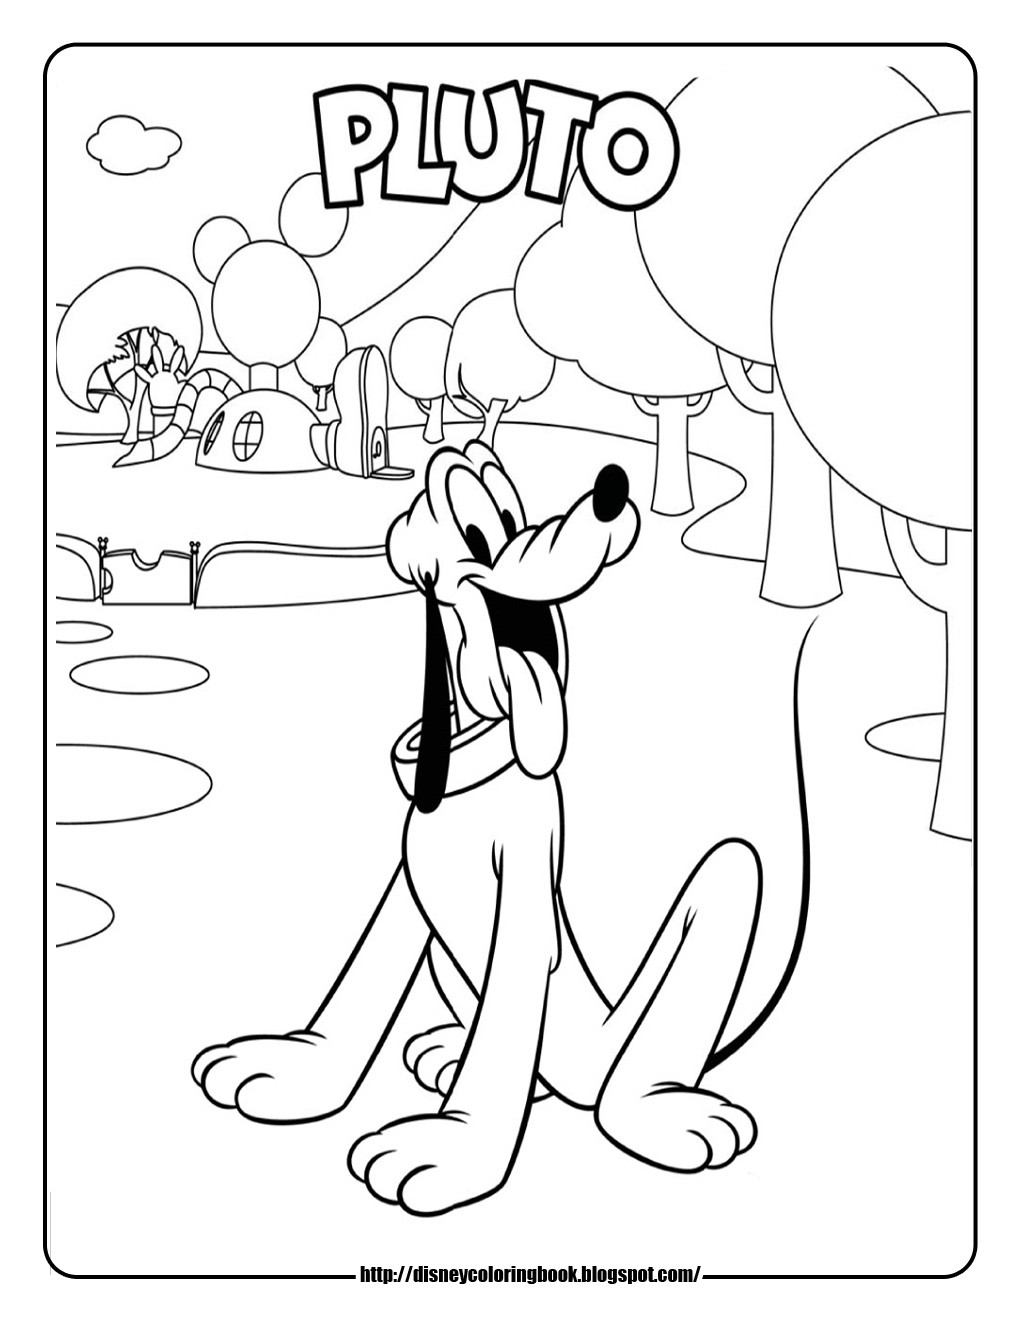 Mickey Mouse Clubhouse Printable Coloring Pages
 Disney Coloring Pages and Sheets for Kids Mickey Mouse